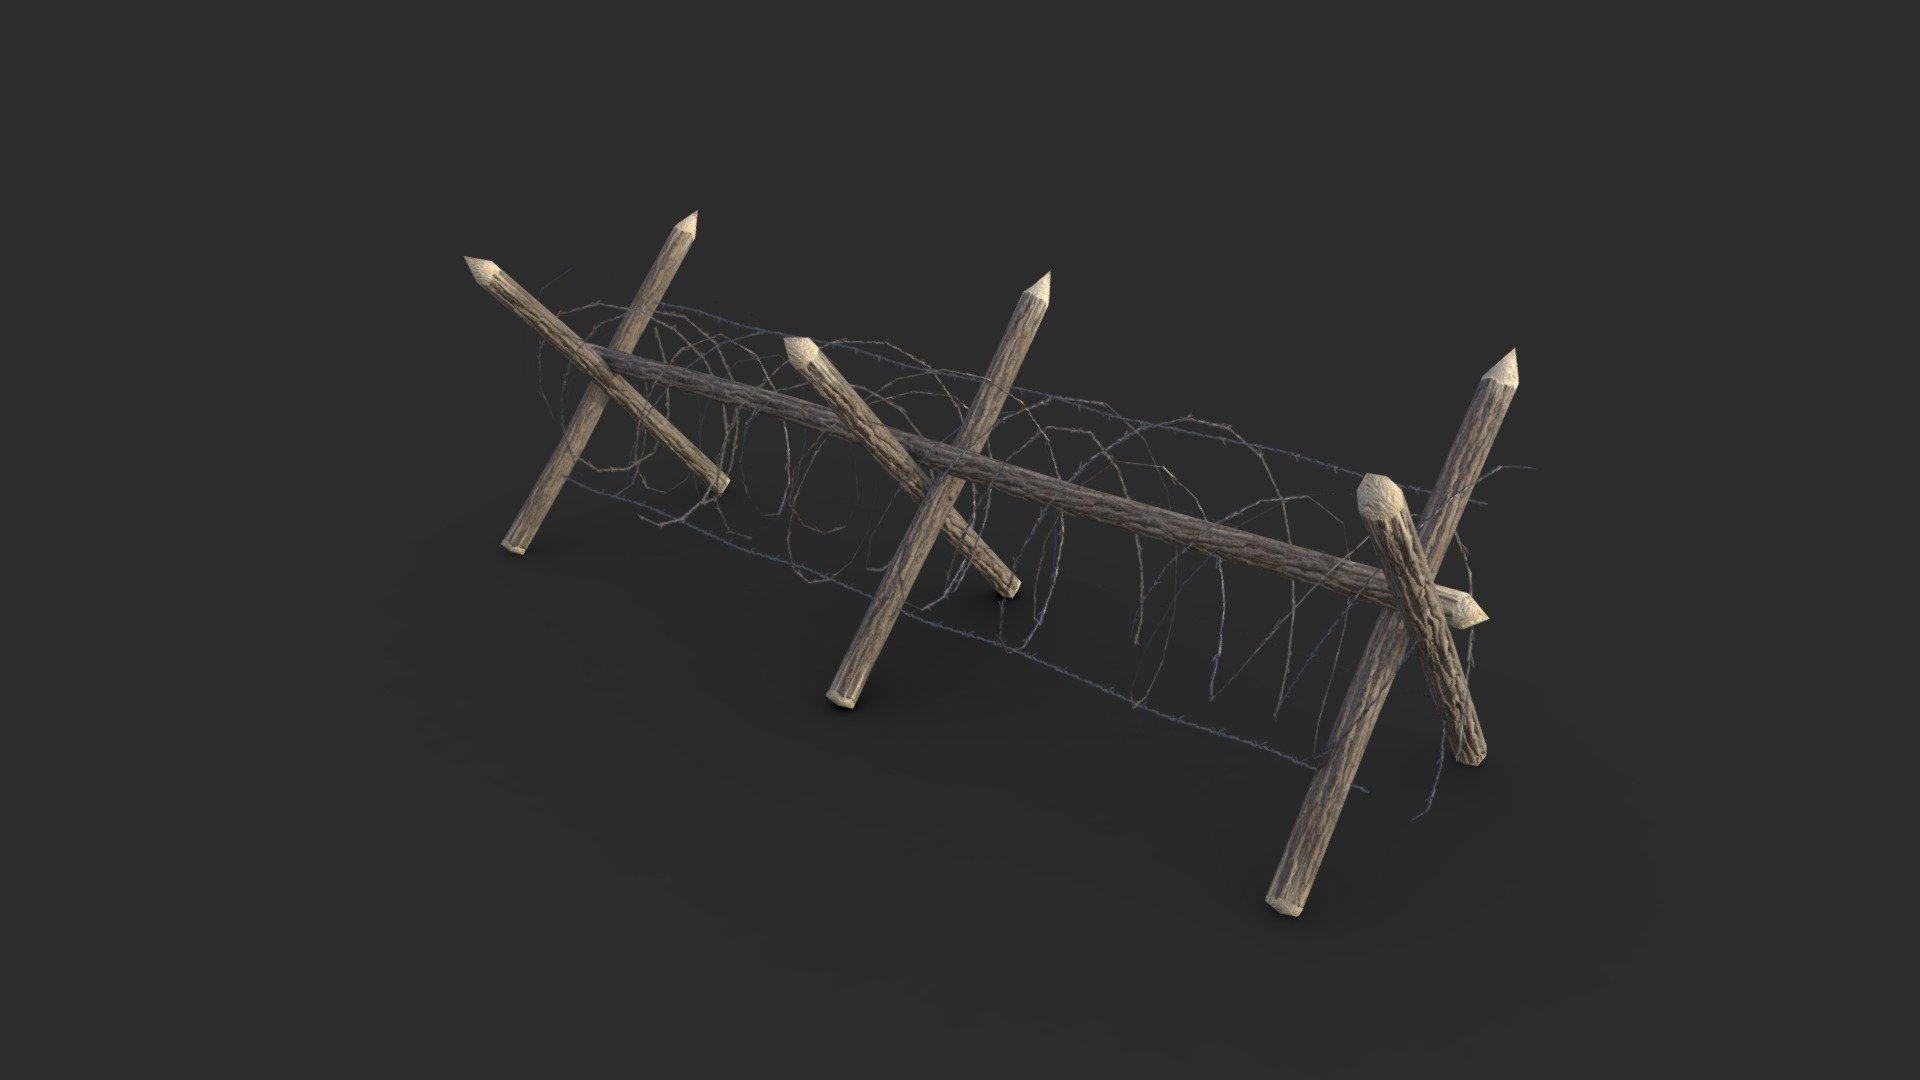 A 3D model of a barbed wire fence used during the WWI and the WWII. This fence was used in front of trenches for WWI and also on the Atlantic Wall during the D-Day in Normandy for WWII. This model is game ready and includes 3 LODs. It includes a unique material with 2 versions of textures (clean and dirty).

The 3D model is ready for game and low poly using. All materials are ready for PBR rendering.

Originally created with Blender 2.79b

Low poly model

SPECIFICATIONS

Objects : 3
Polygons : 1202
Subdivision ready : No
Render engine : Cycles render (Eevee ready)

LODs

LOD0 : 796
LOD1 : 264
LOD2 : 142

TEXTURES

Materials in scene : 1
Textures sizes : 4K / 2K / 1K
Textures types : Diffuse, Metallic, Roughness, Normal (DirectX &amp; OpenGL), Heigh and AO
Textures format : PNG

GENERAL

Real scale : Yes
Scene objects are organized by groups

ADDITIONAL NOTES

File formats do not include textures. All textures are in a specific folder named &lsquo;Textures' - Barbed wire fence WWII - Buy Royalty Free 3D model by KangaroOz 3D (@KangaroOz-3D) 3d model